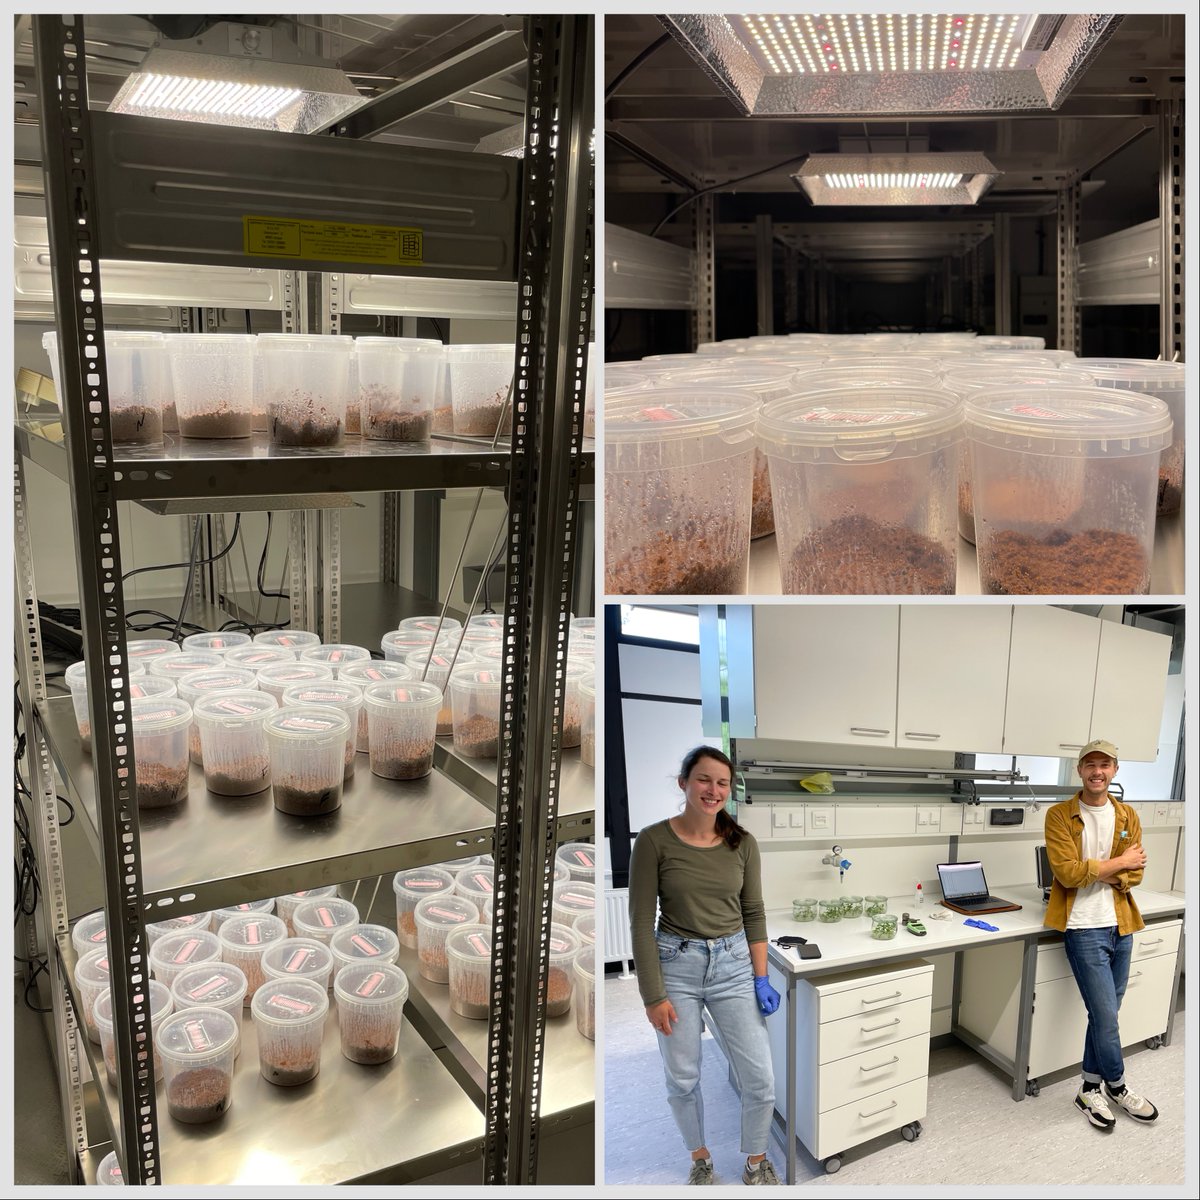 Slowly we are invading our new labs and climate chamber @Uni_MR @Bio_UMR … but lot of work ahead of us to make it all fully functional! 🦠🍄🧫🧪🌱